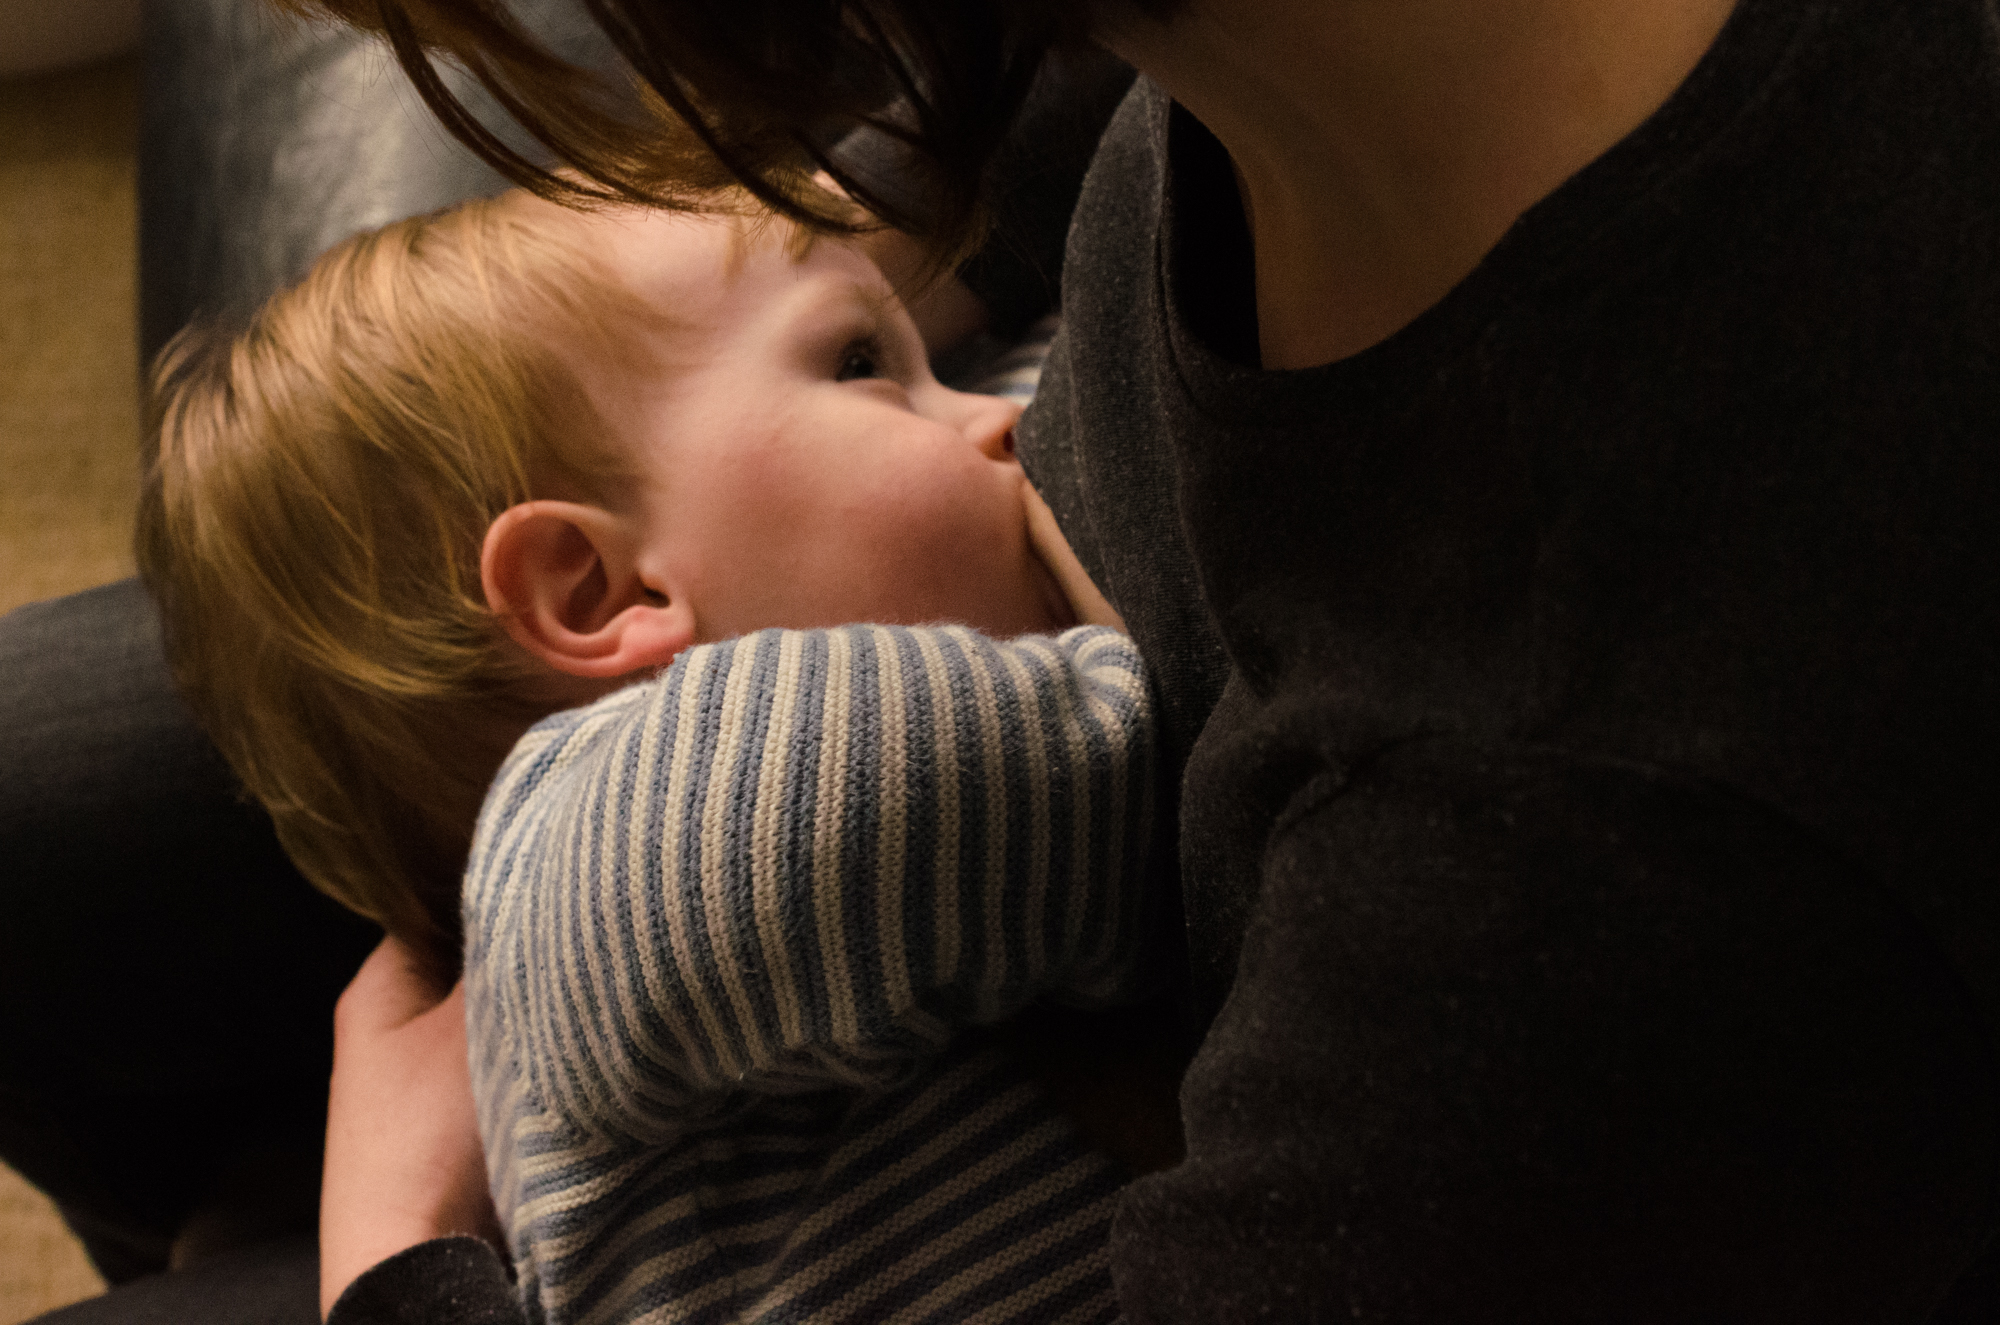 My extended breastfeeding story for Columns by Kari